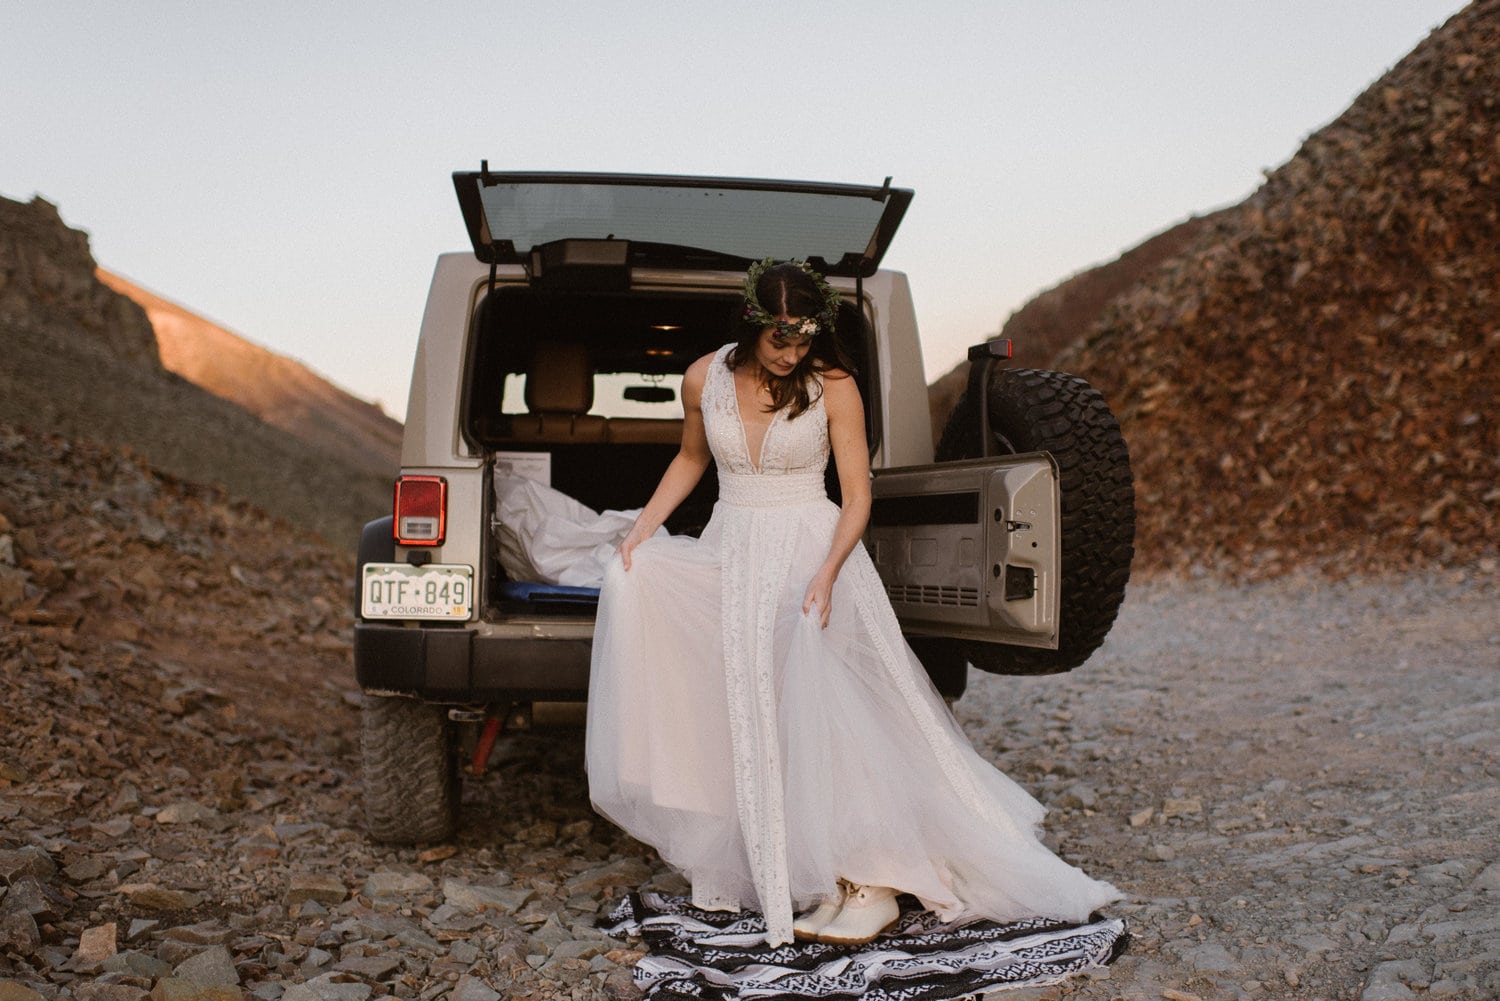 Bride getting ready for her elopement behind a Jeep. She is standing on a blanket and wearing a white dress and flower crown.